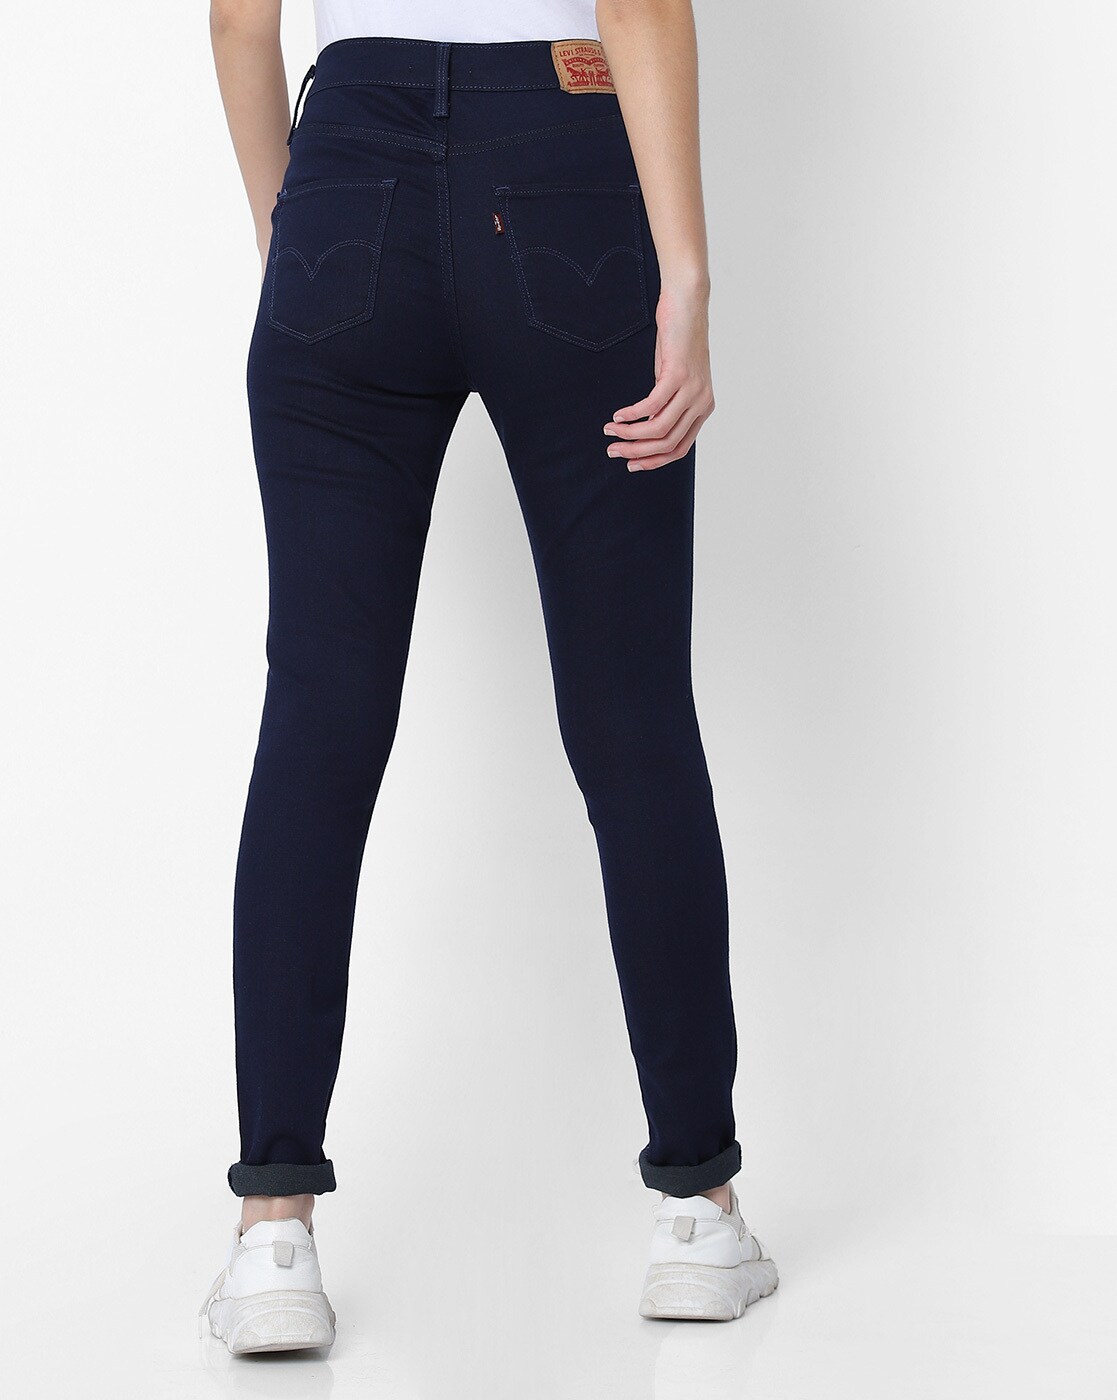 Buy Black Jeans & for by LEVIS Online | Ajio.com